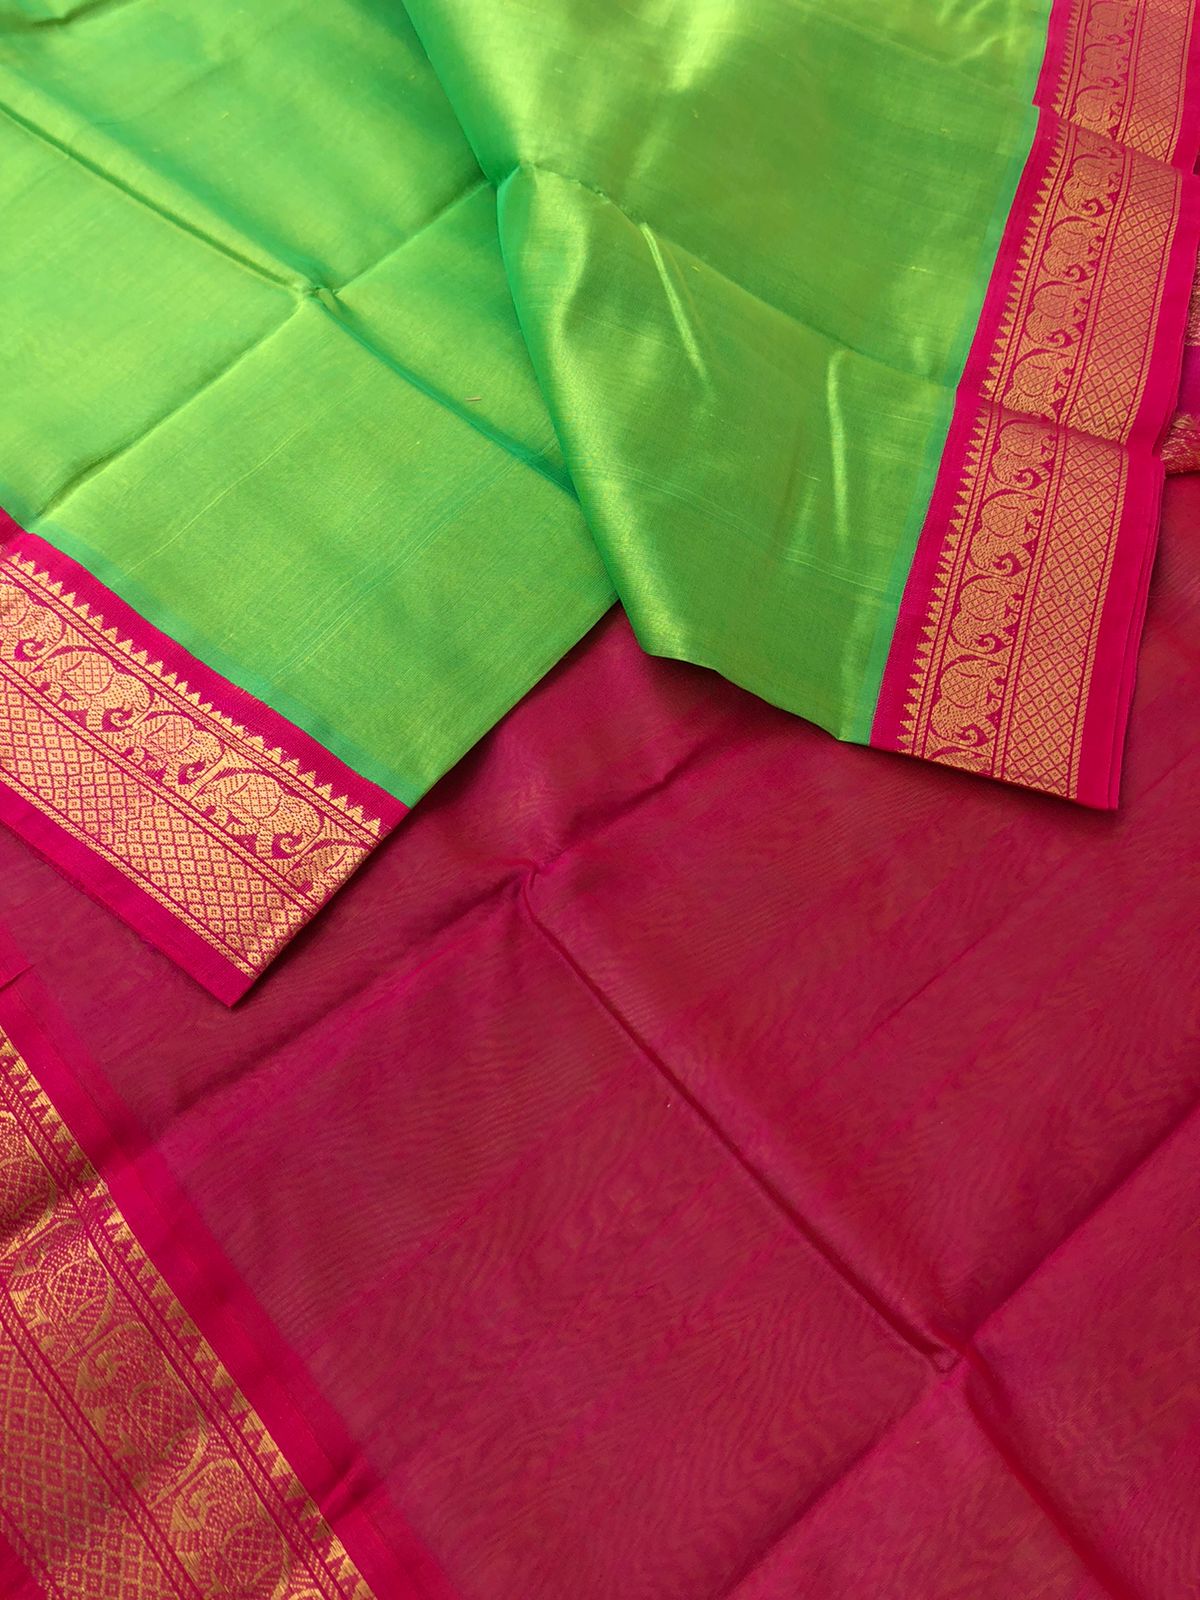 Korvai Silk Cotton - apple green and pink